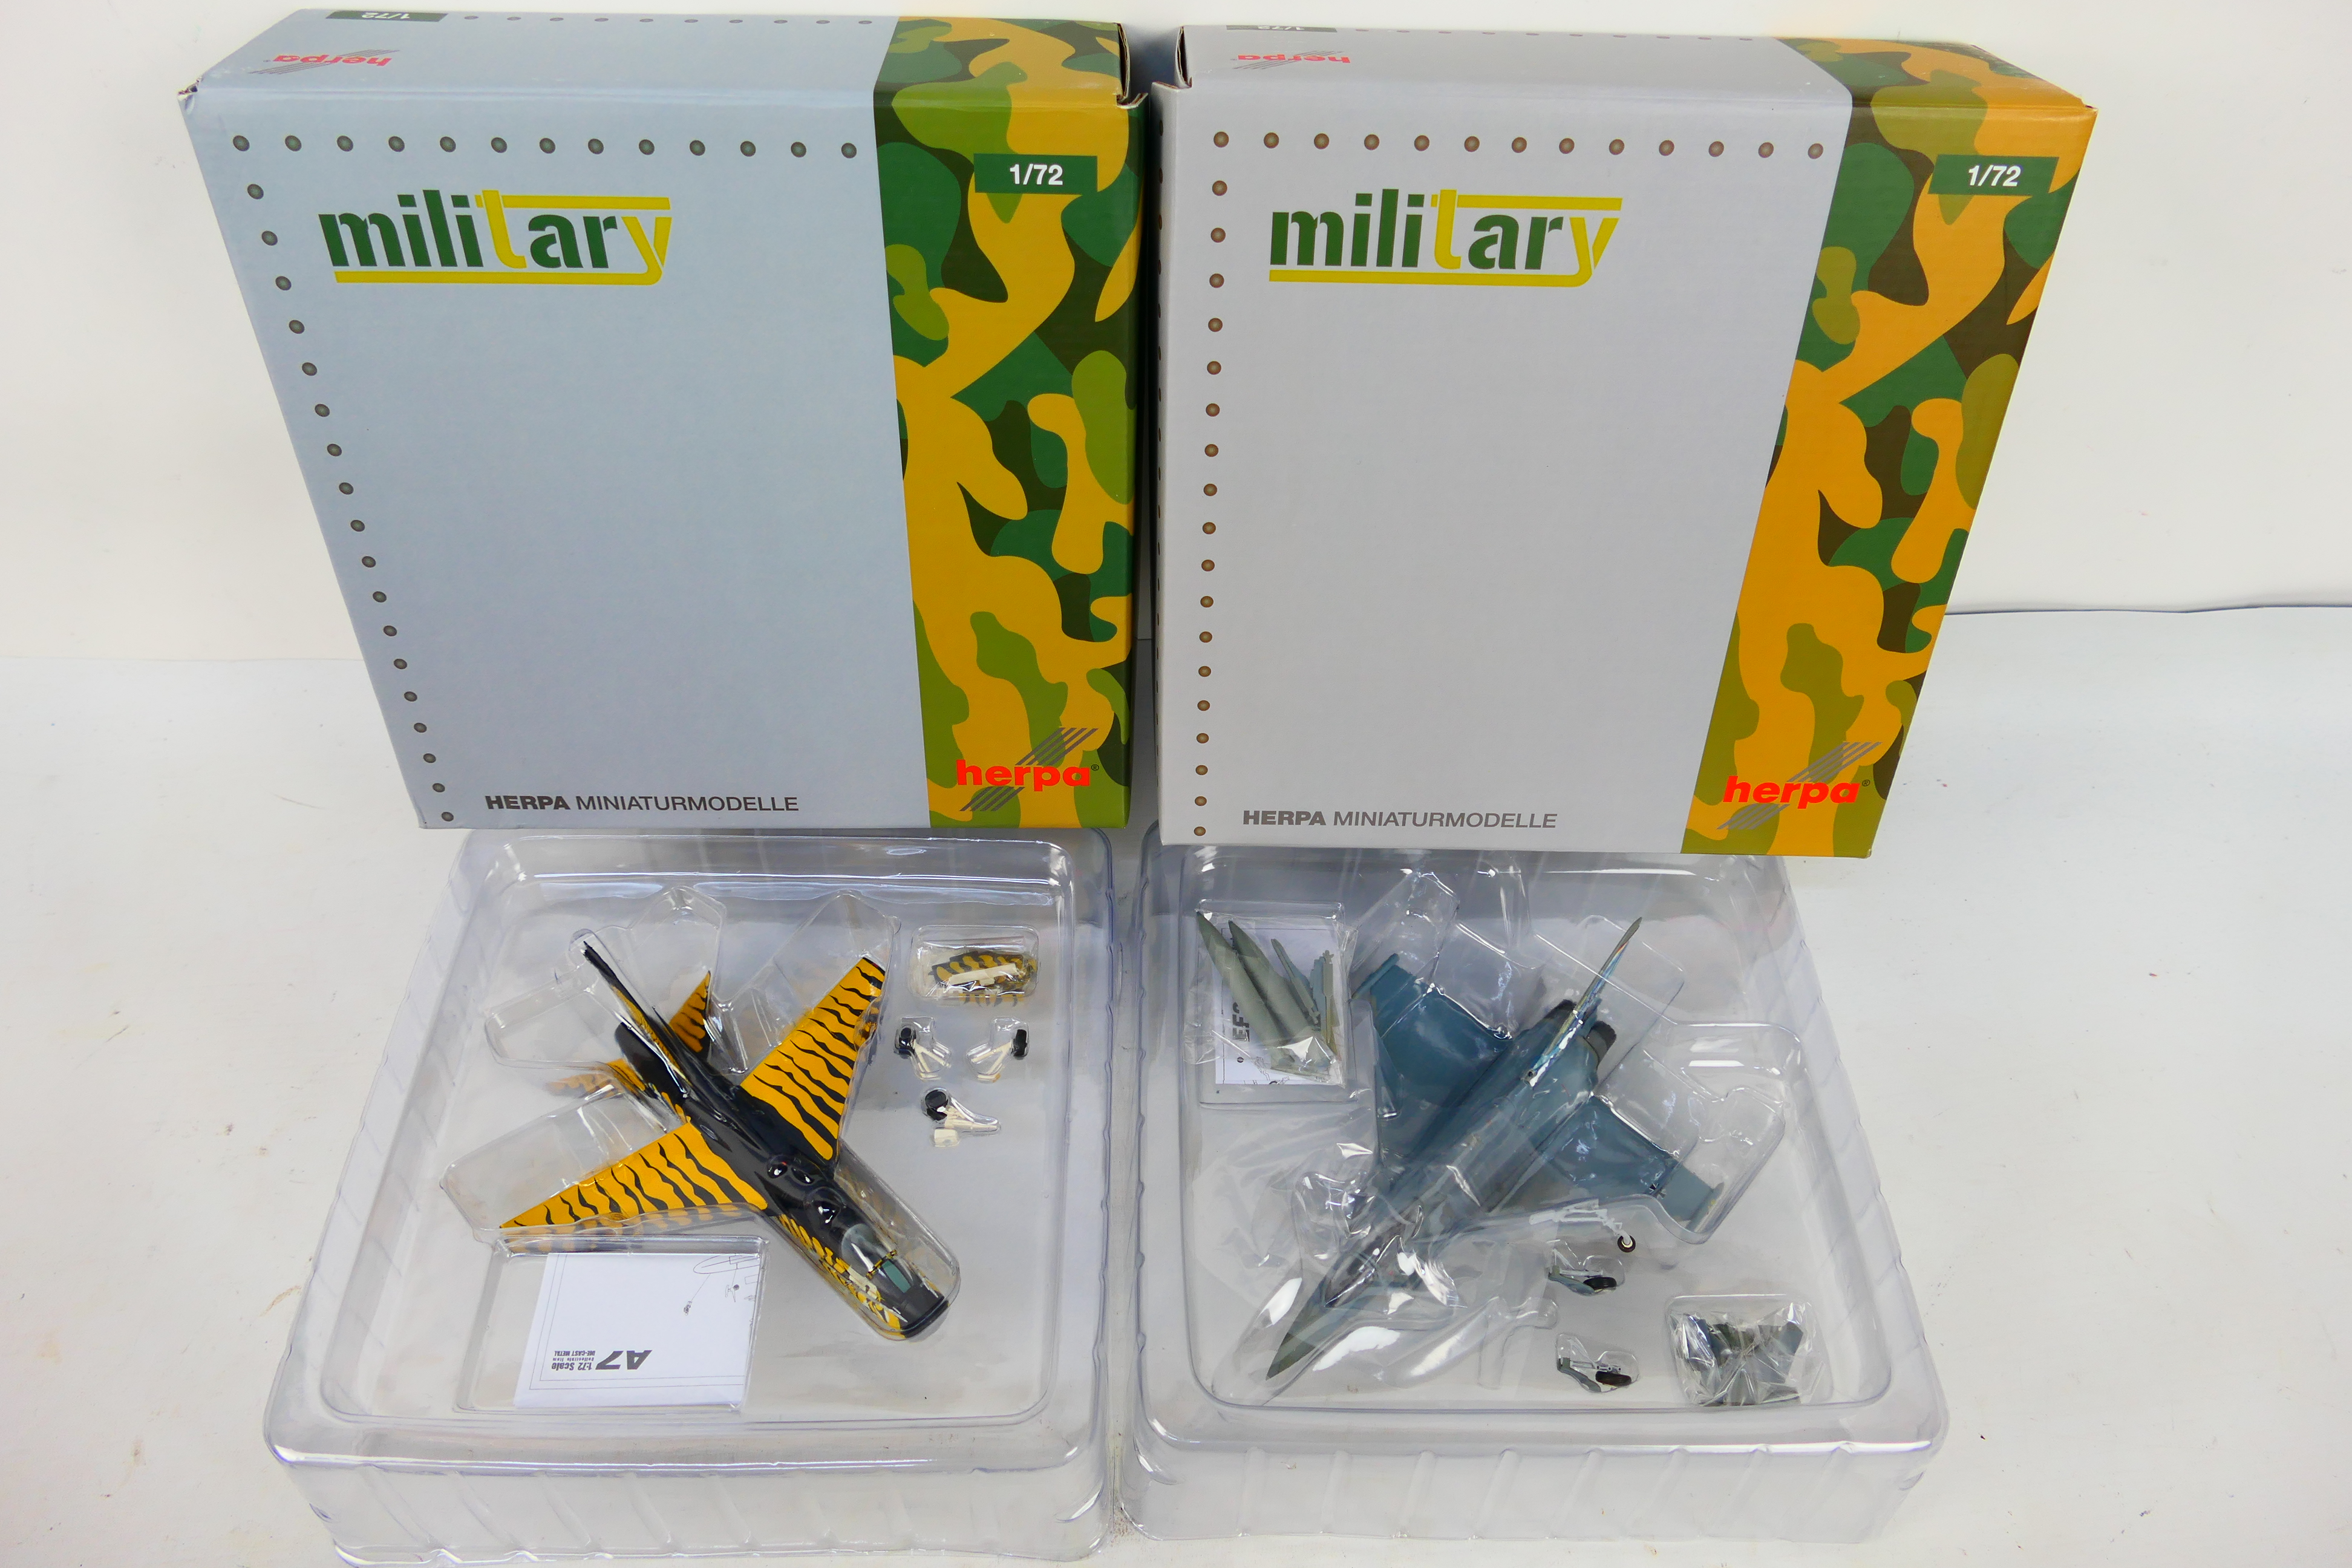 Herpa - Two boxed diecast 1:72 scale military aircraft models from Herpa Military.